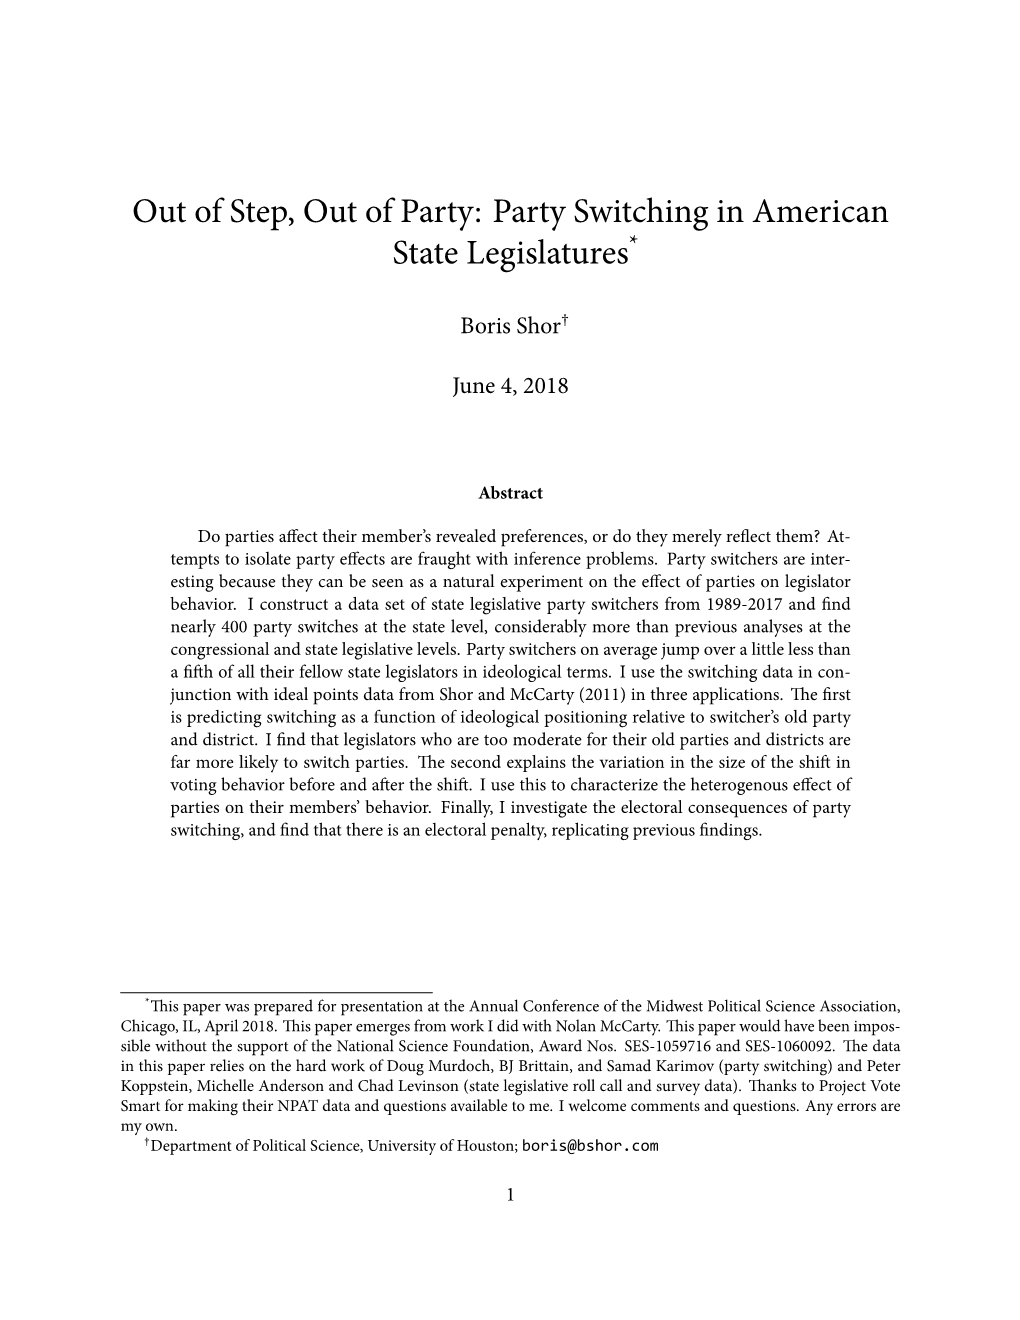 Party Switching in American State Legislatures*